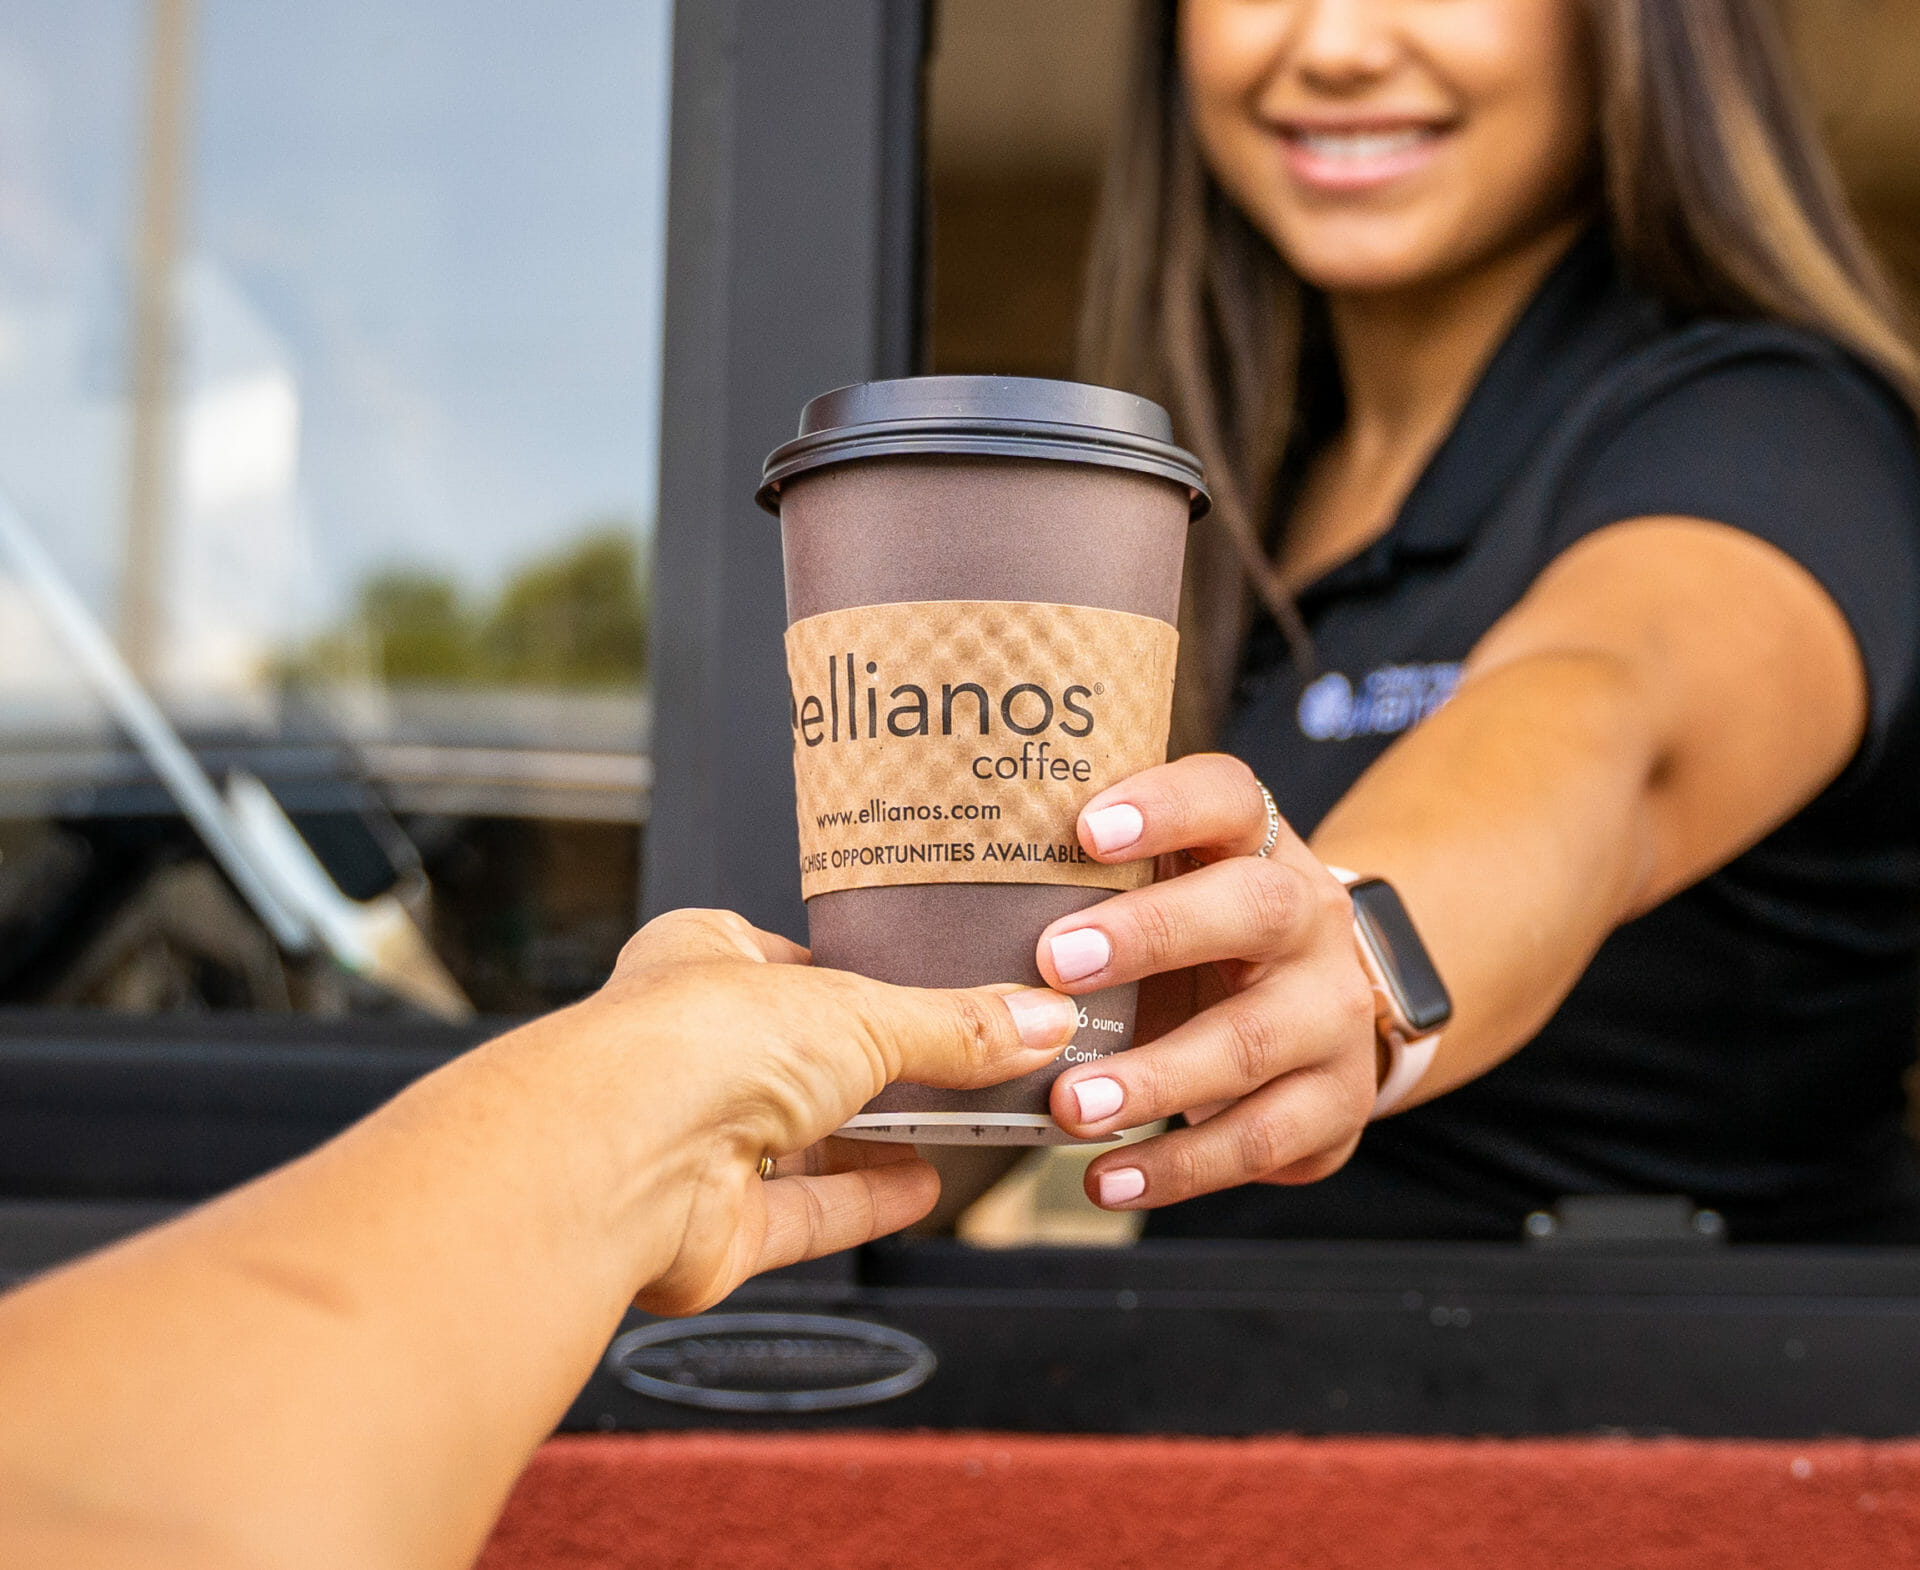 Ellianos Coffee Drive-Thru Soon to Open New Location in Moultrie, Georgia